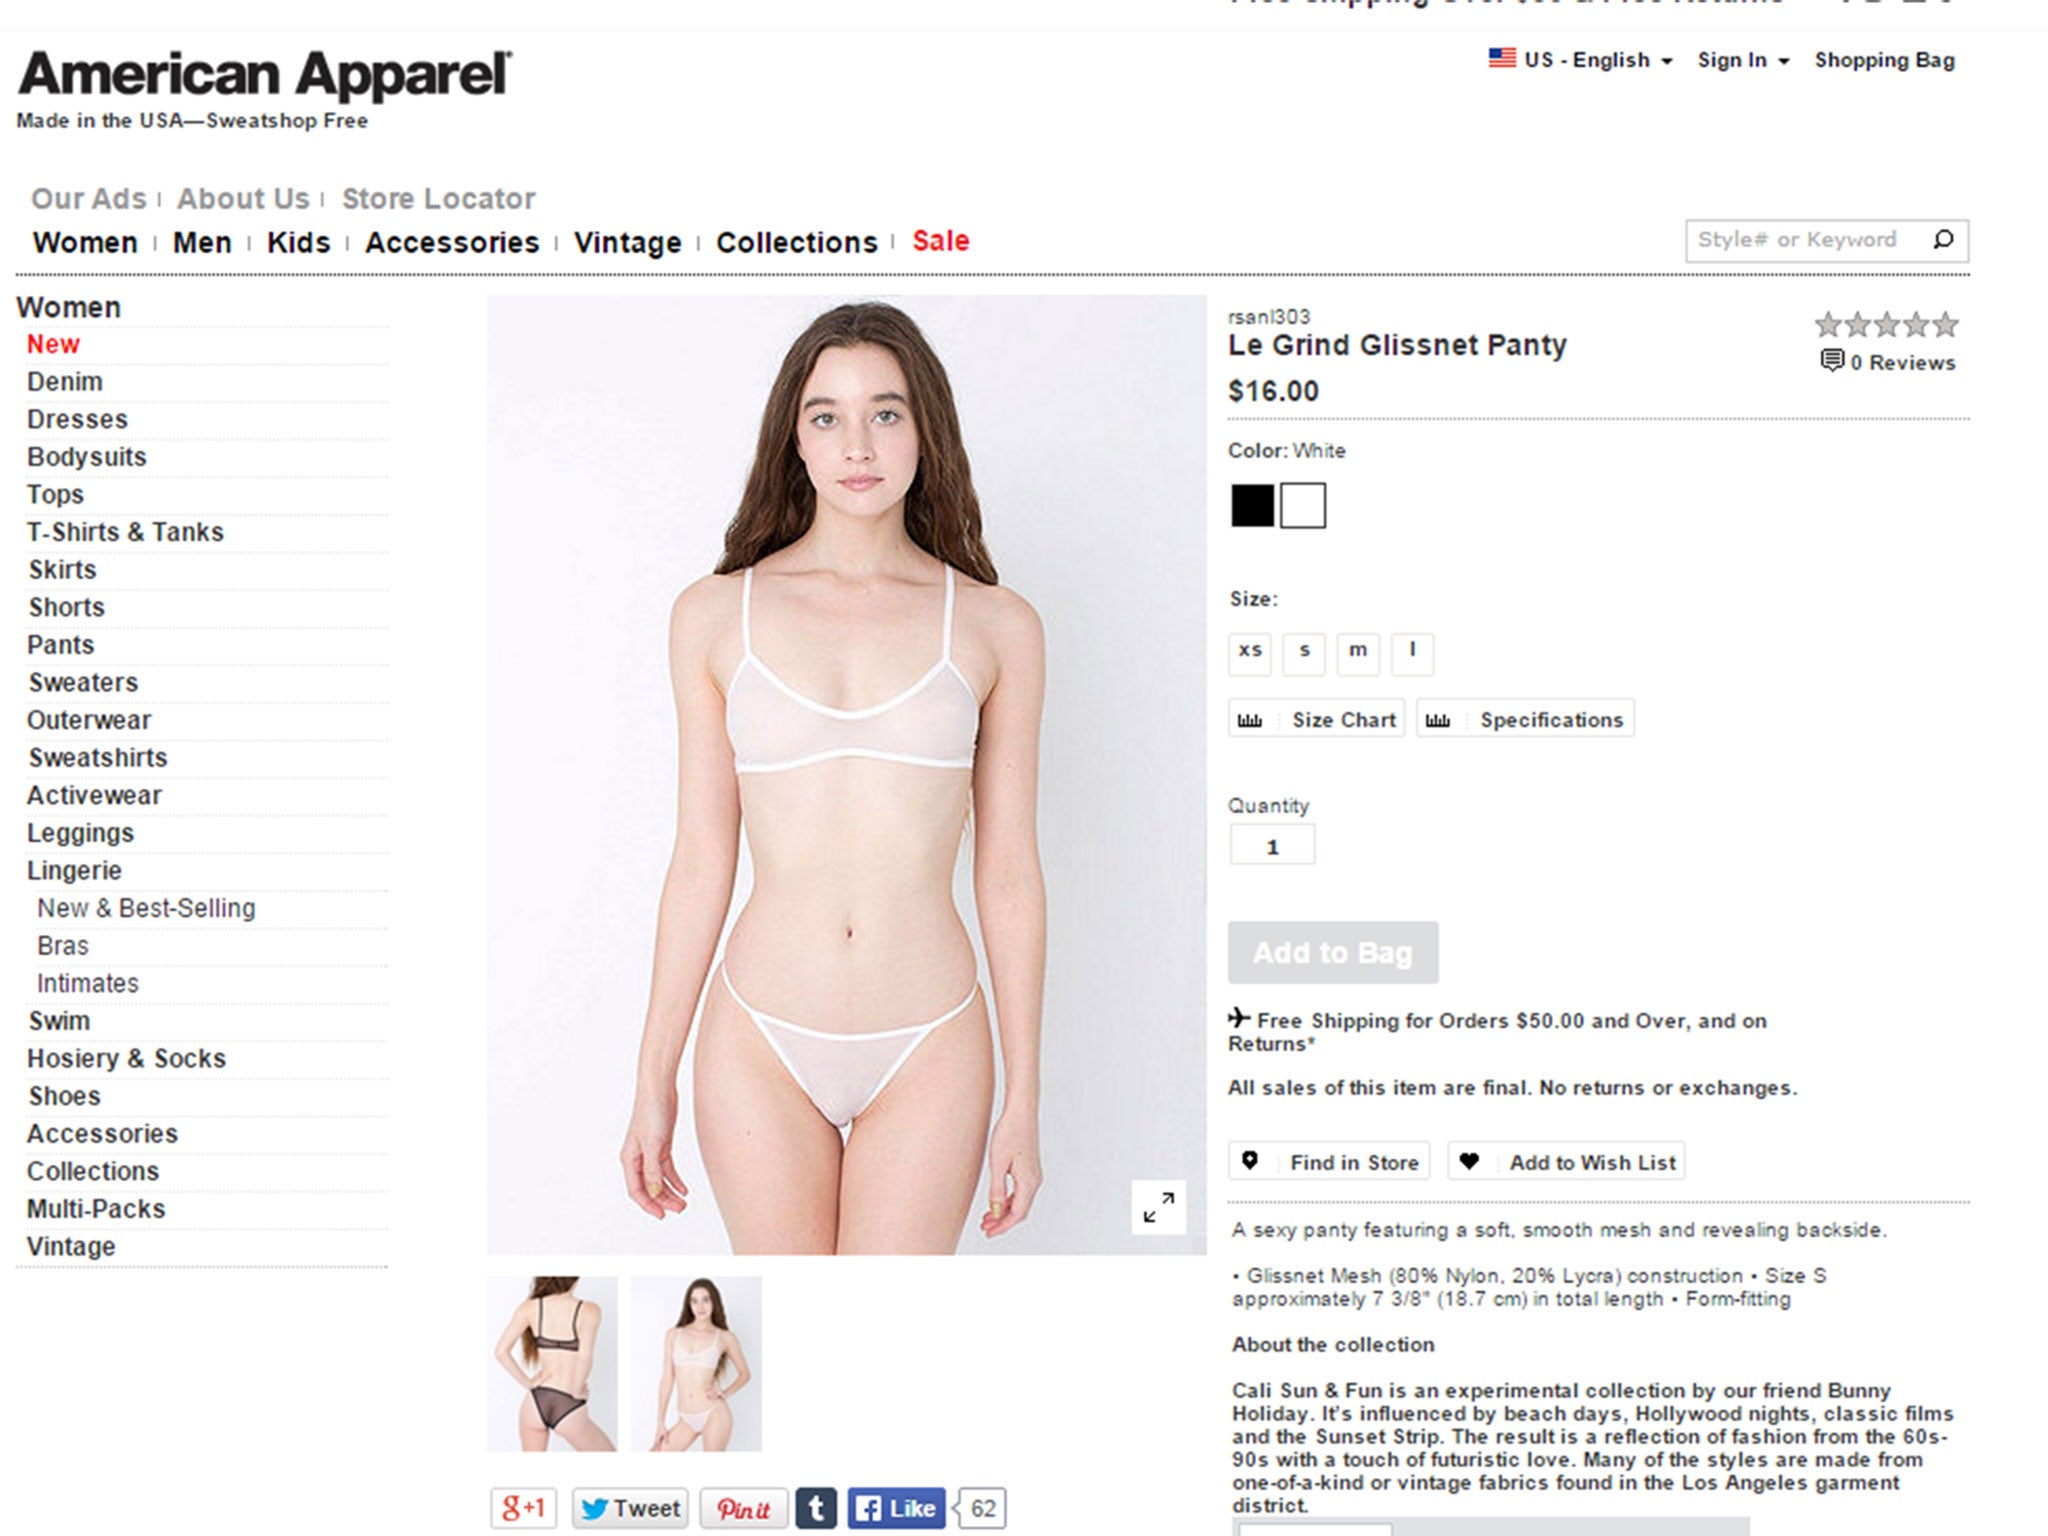 American apparel ads banned